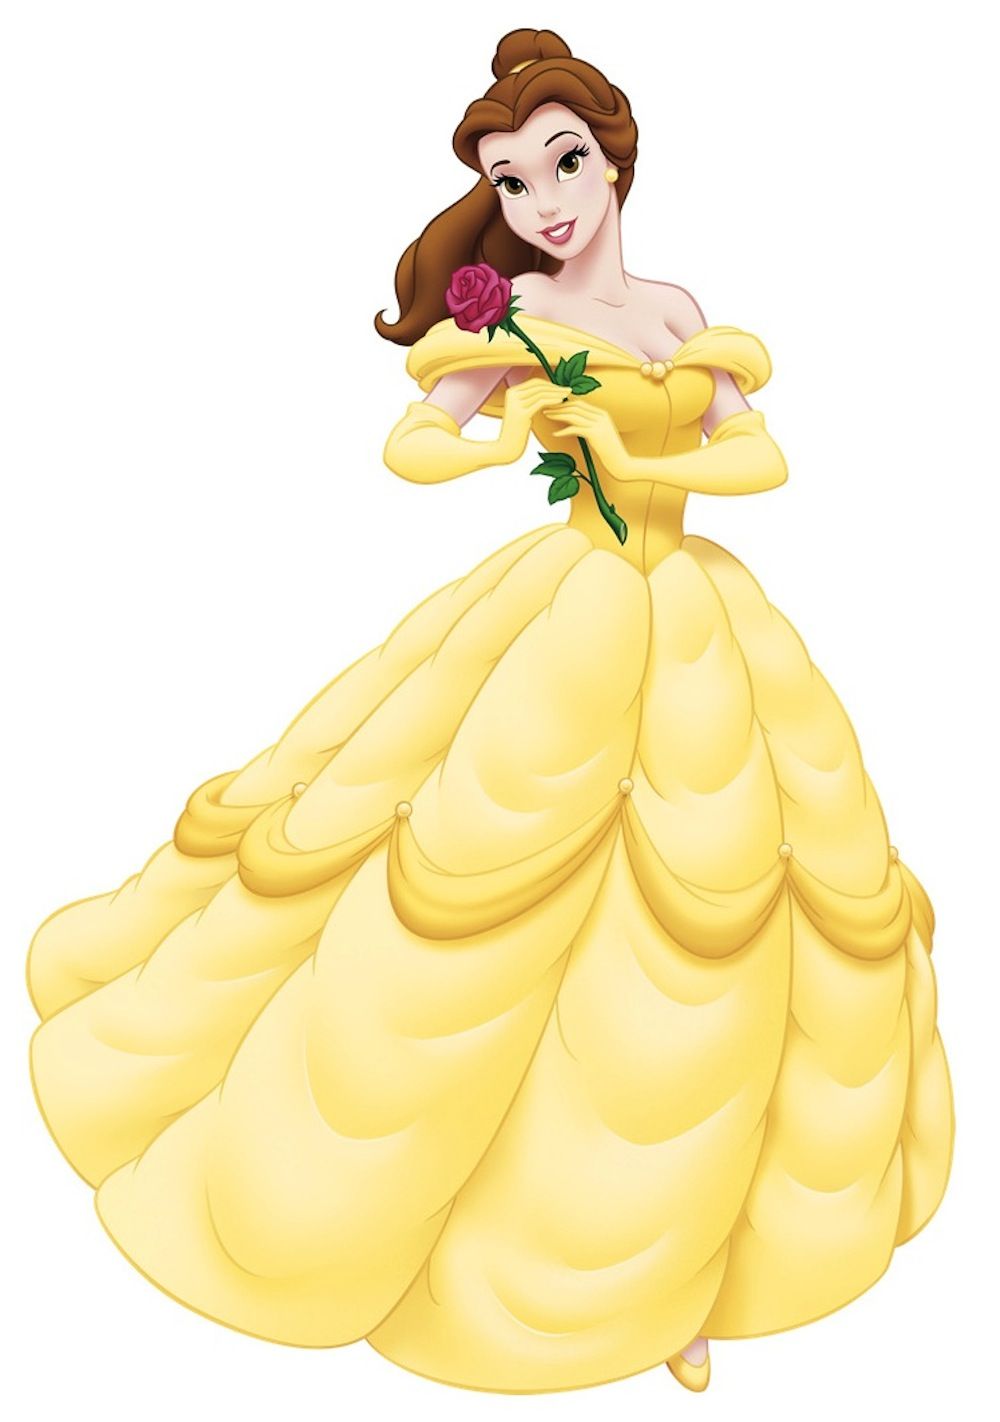 This is What Belle From Beauty And the Beast Would Look Like If